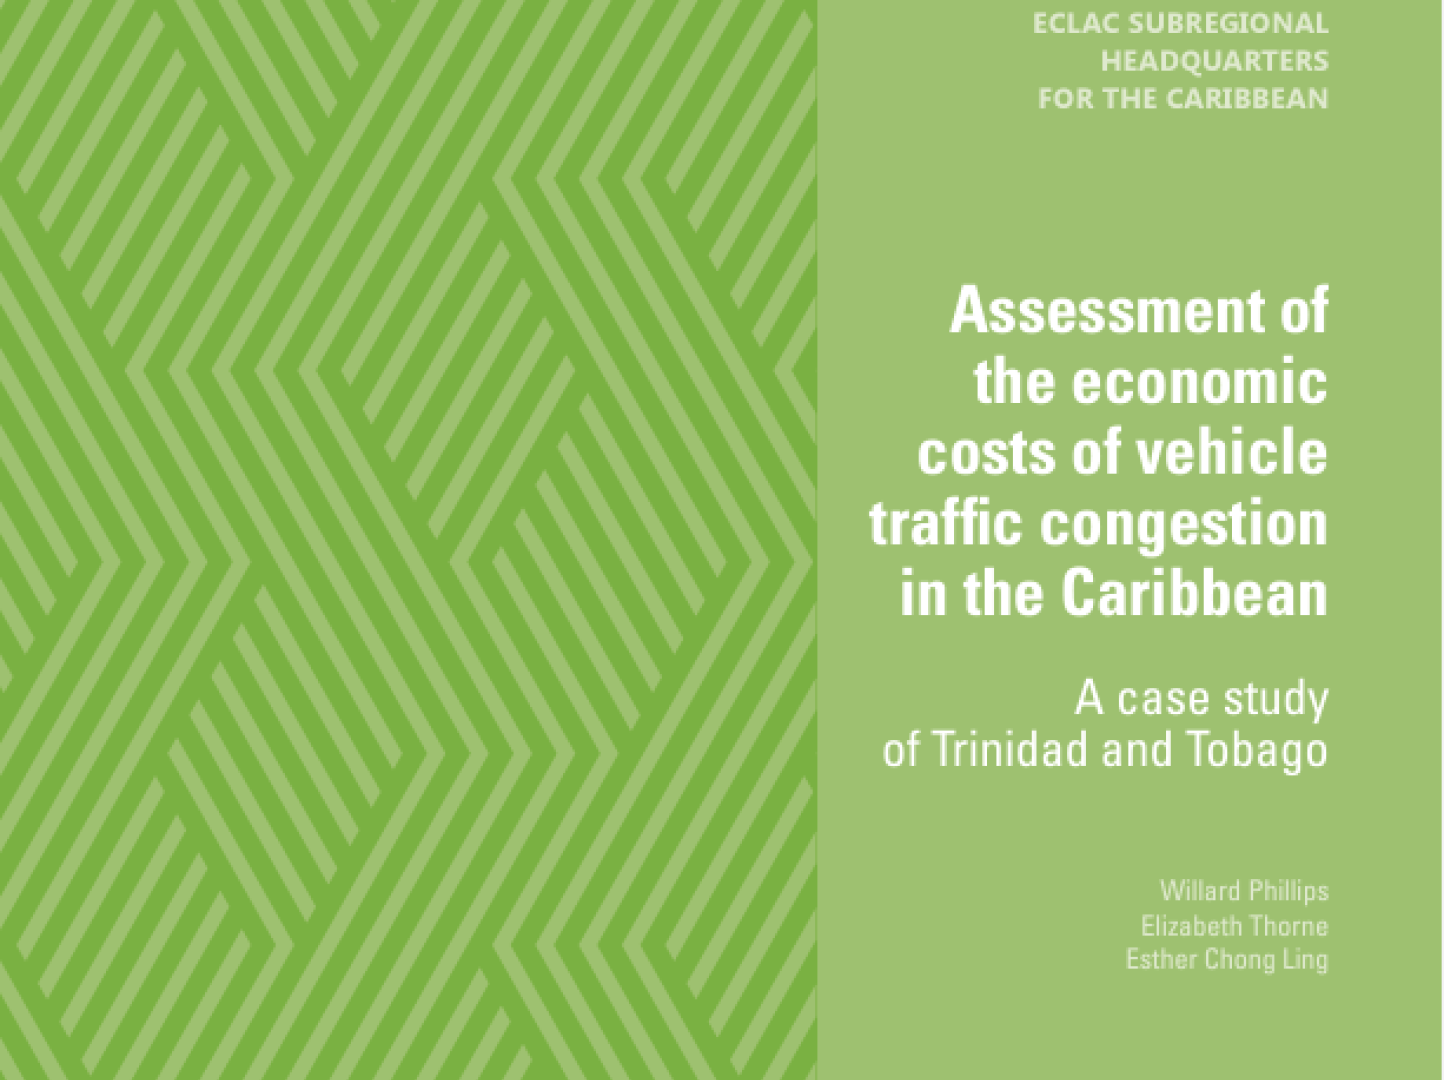 Assessment of the economic costs of vehicle traffic congestion in the Caribbean: a case study of Trinidad and Tobago